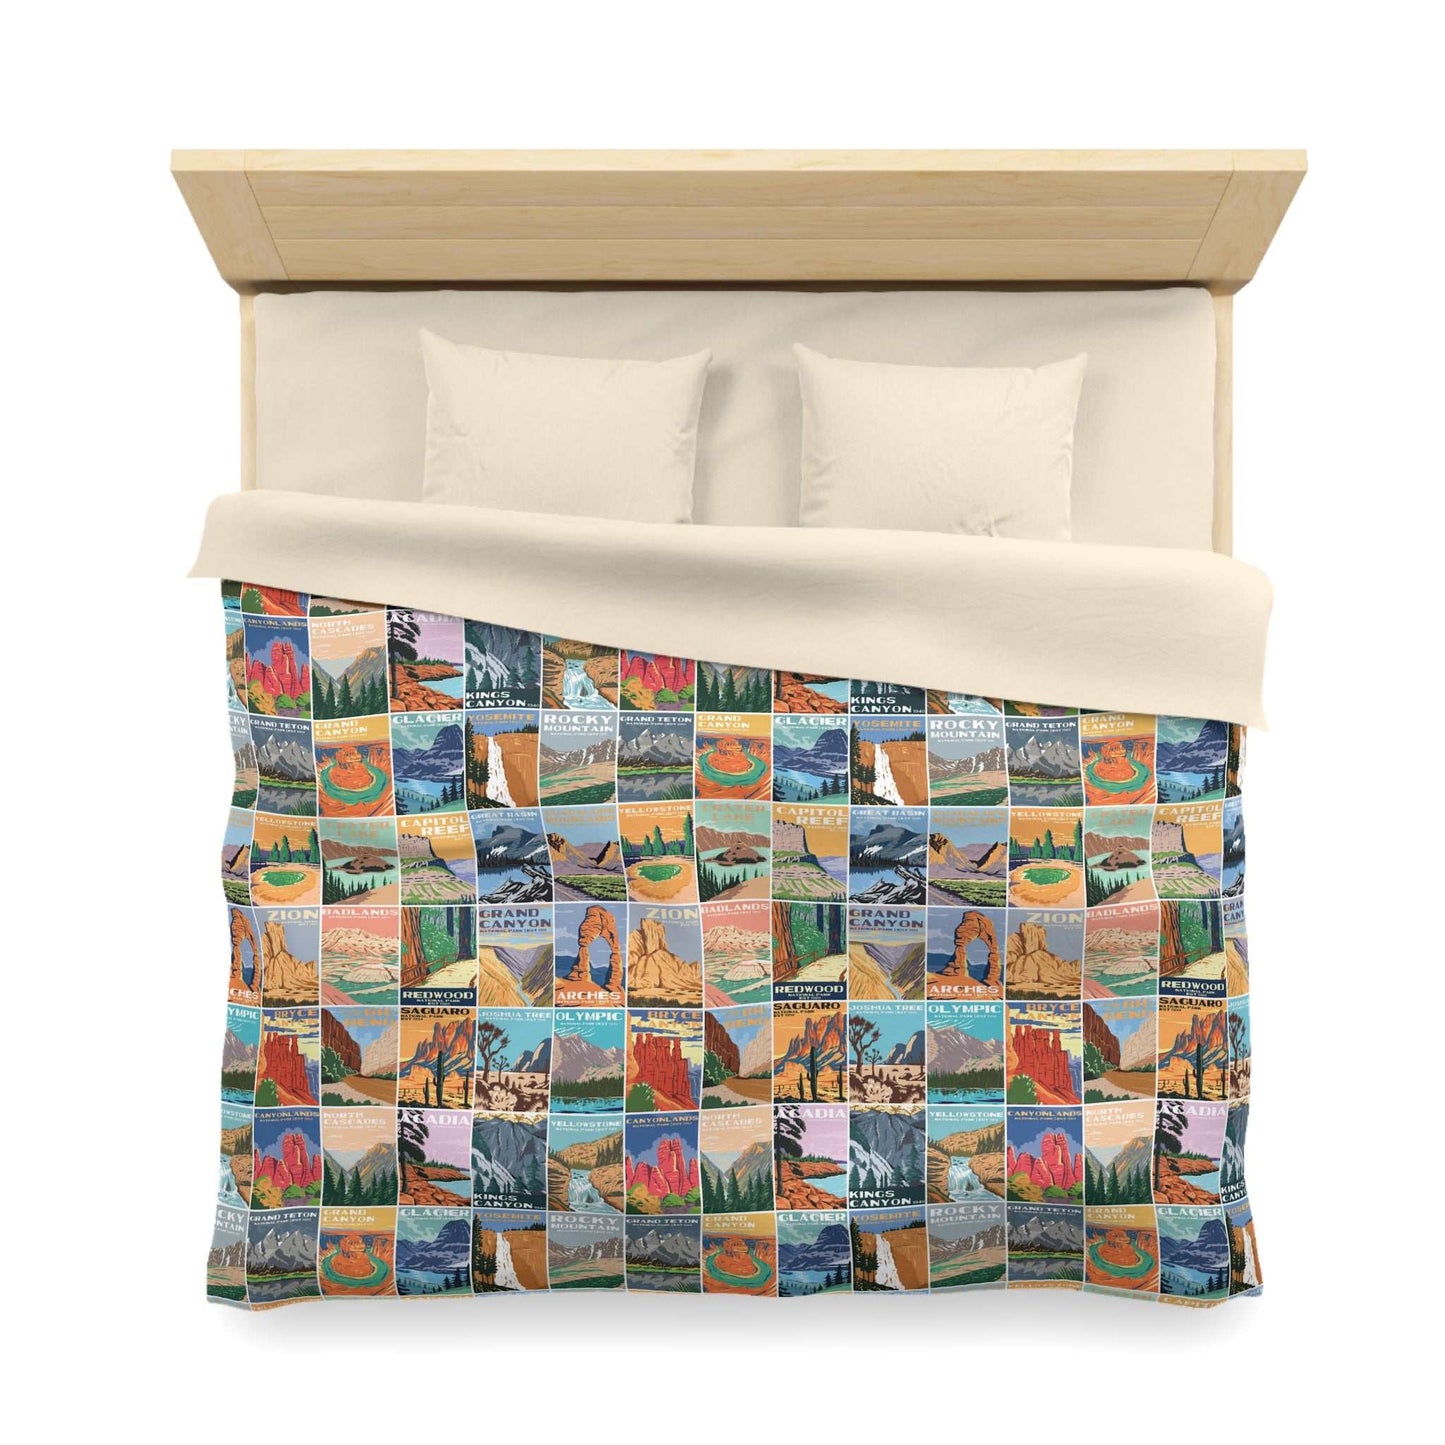 National Parks Microfiber Duvet CoverCozy up and remember all your favorite memories from your National Park adventures with this vintage styled National Park posters duvet cover for a deep and relaxing